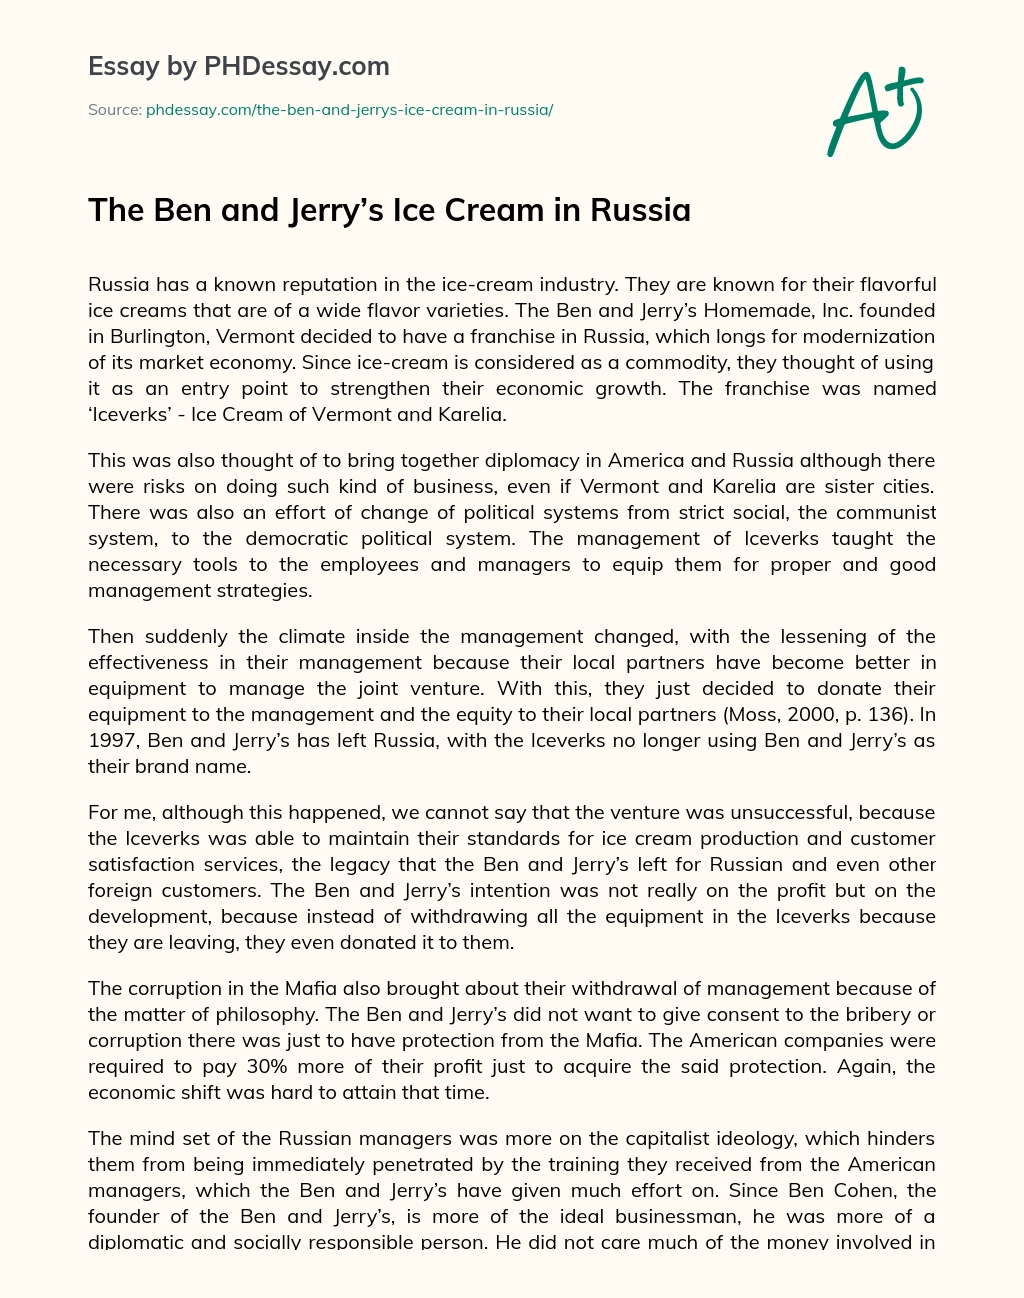 The Ben and Jerry’s Ice Cream in Russia essay